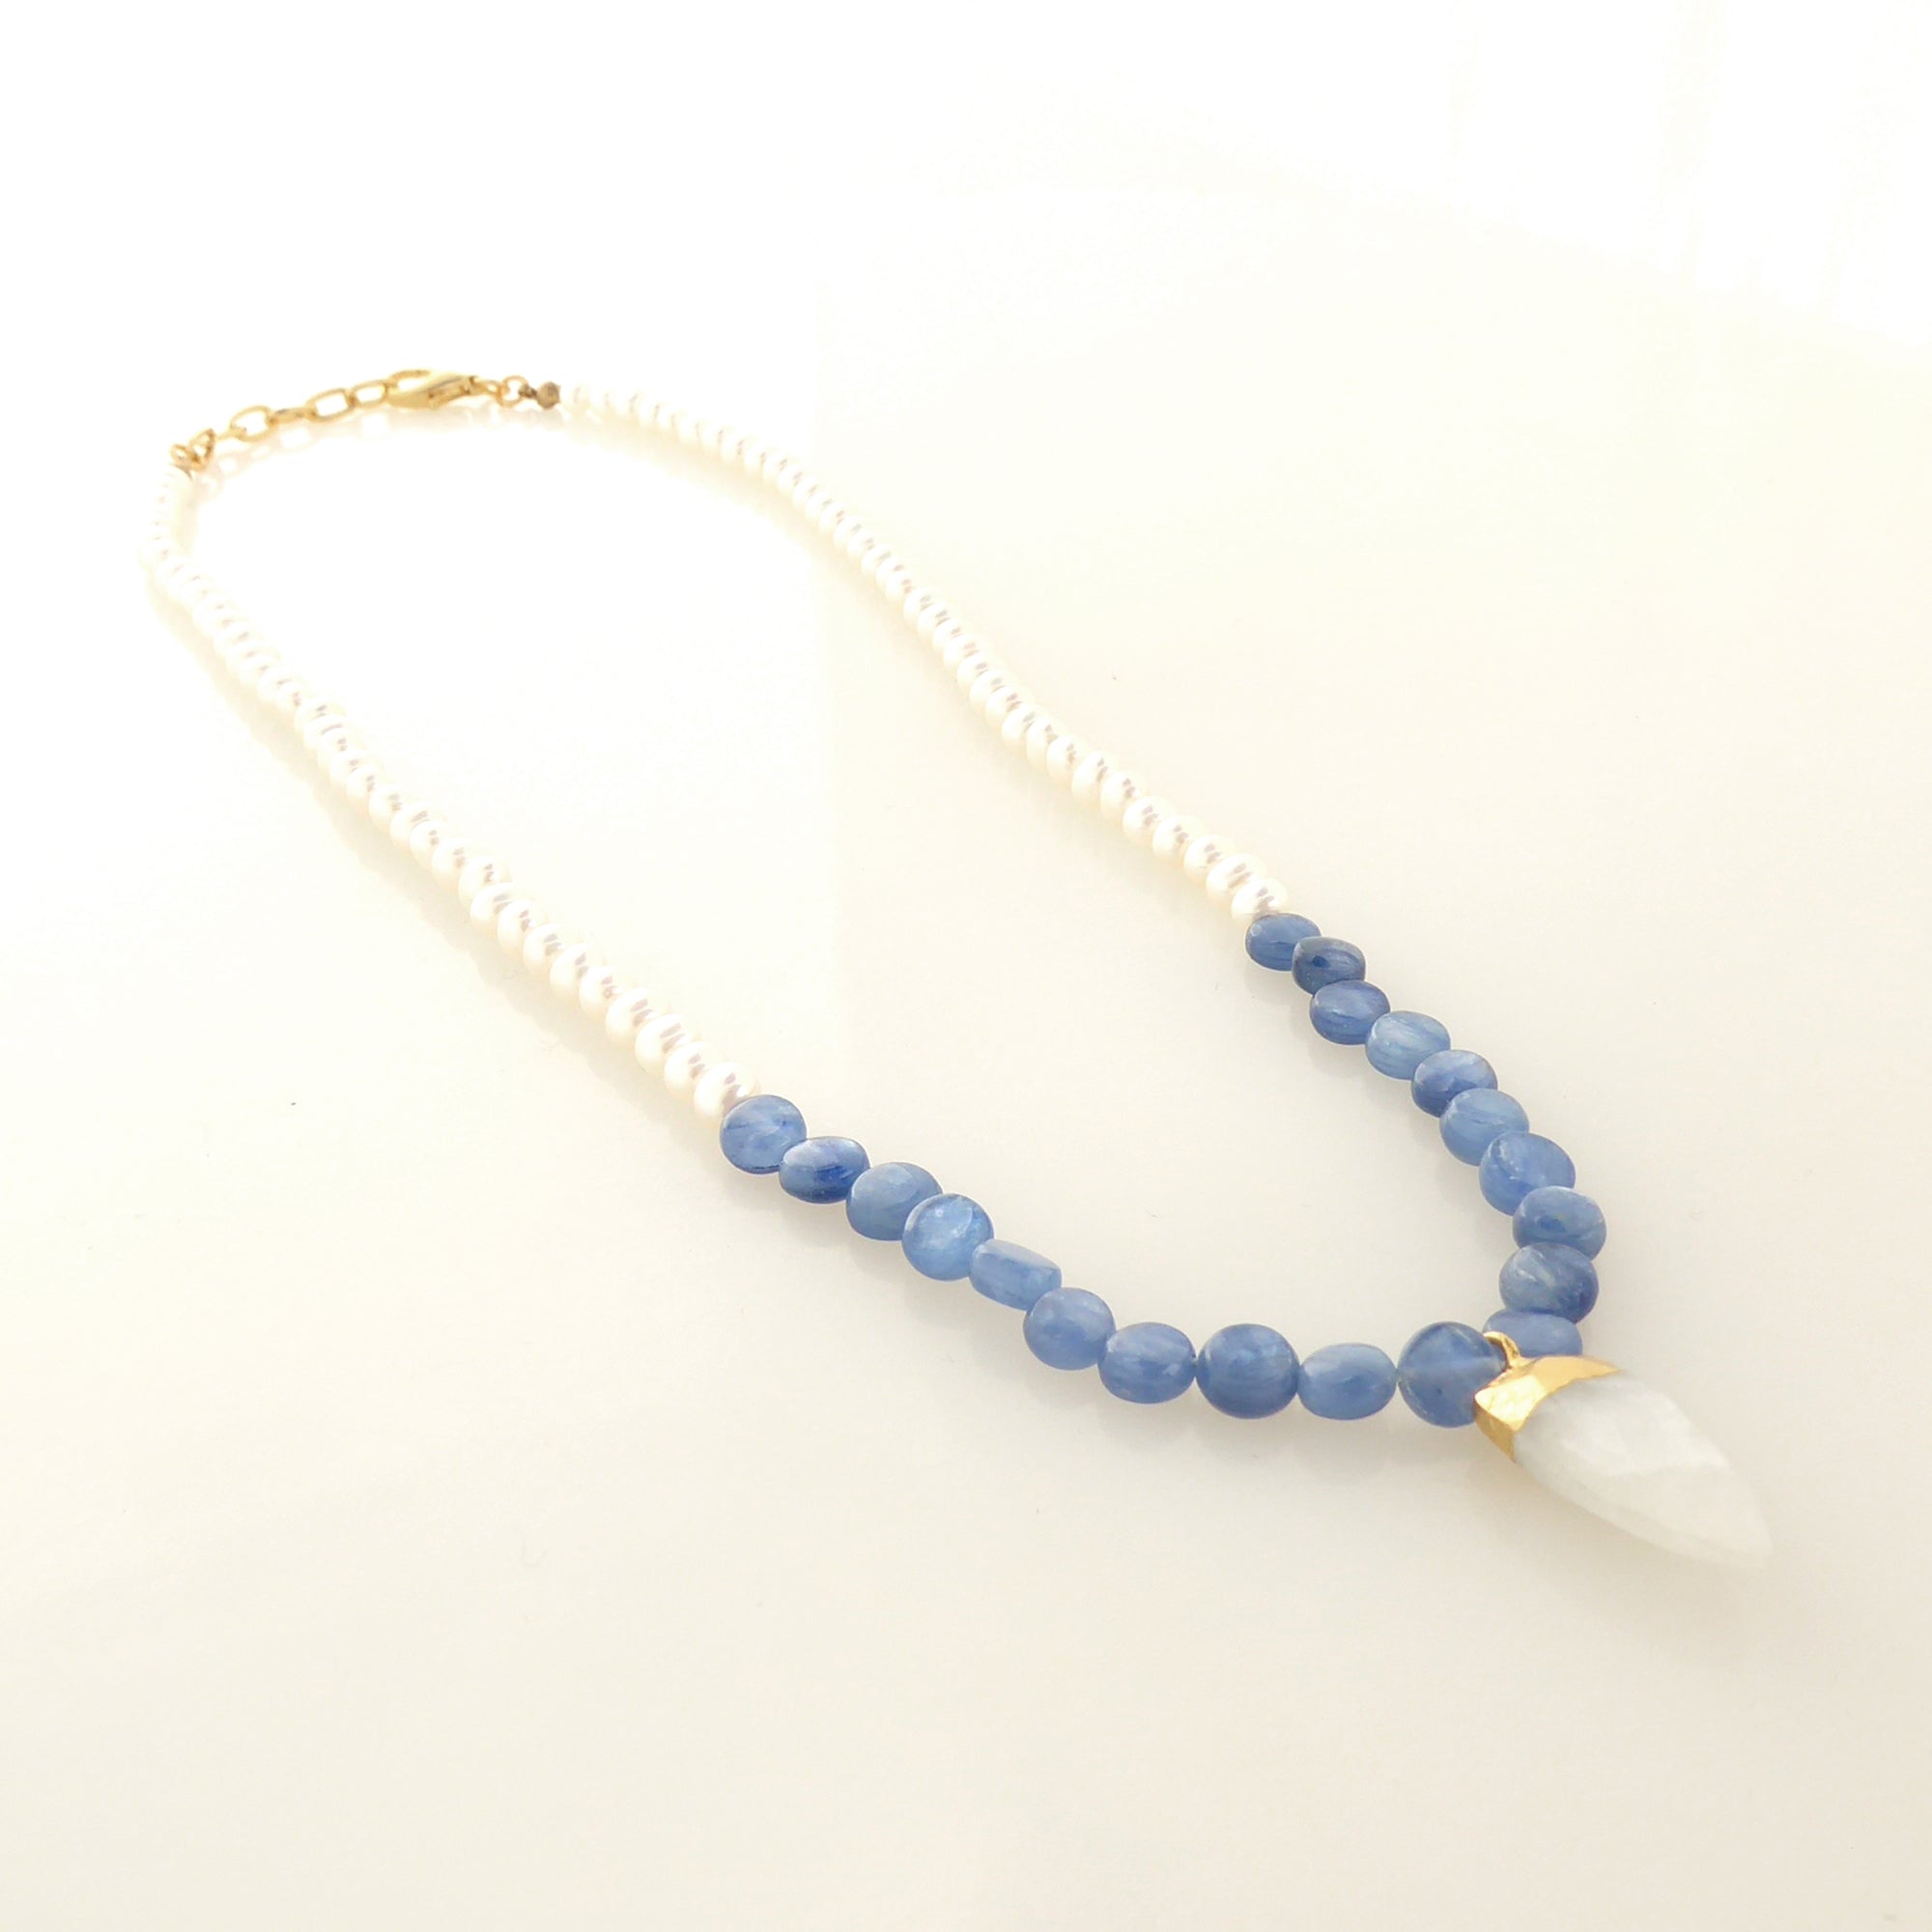 Moonstone and blue kyanite pearl necklace by Jenny Dayco 2